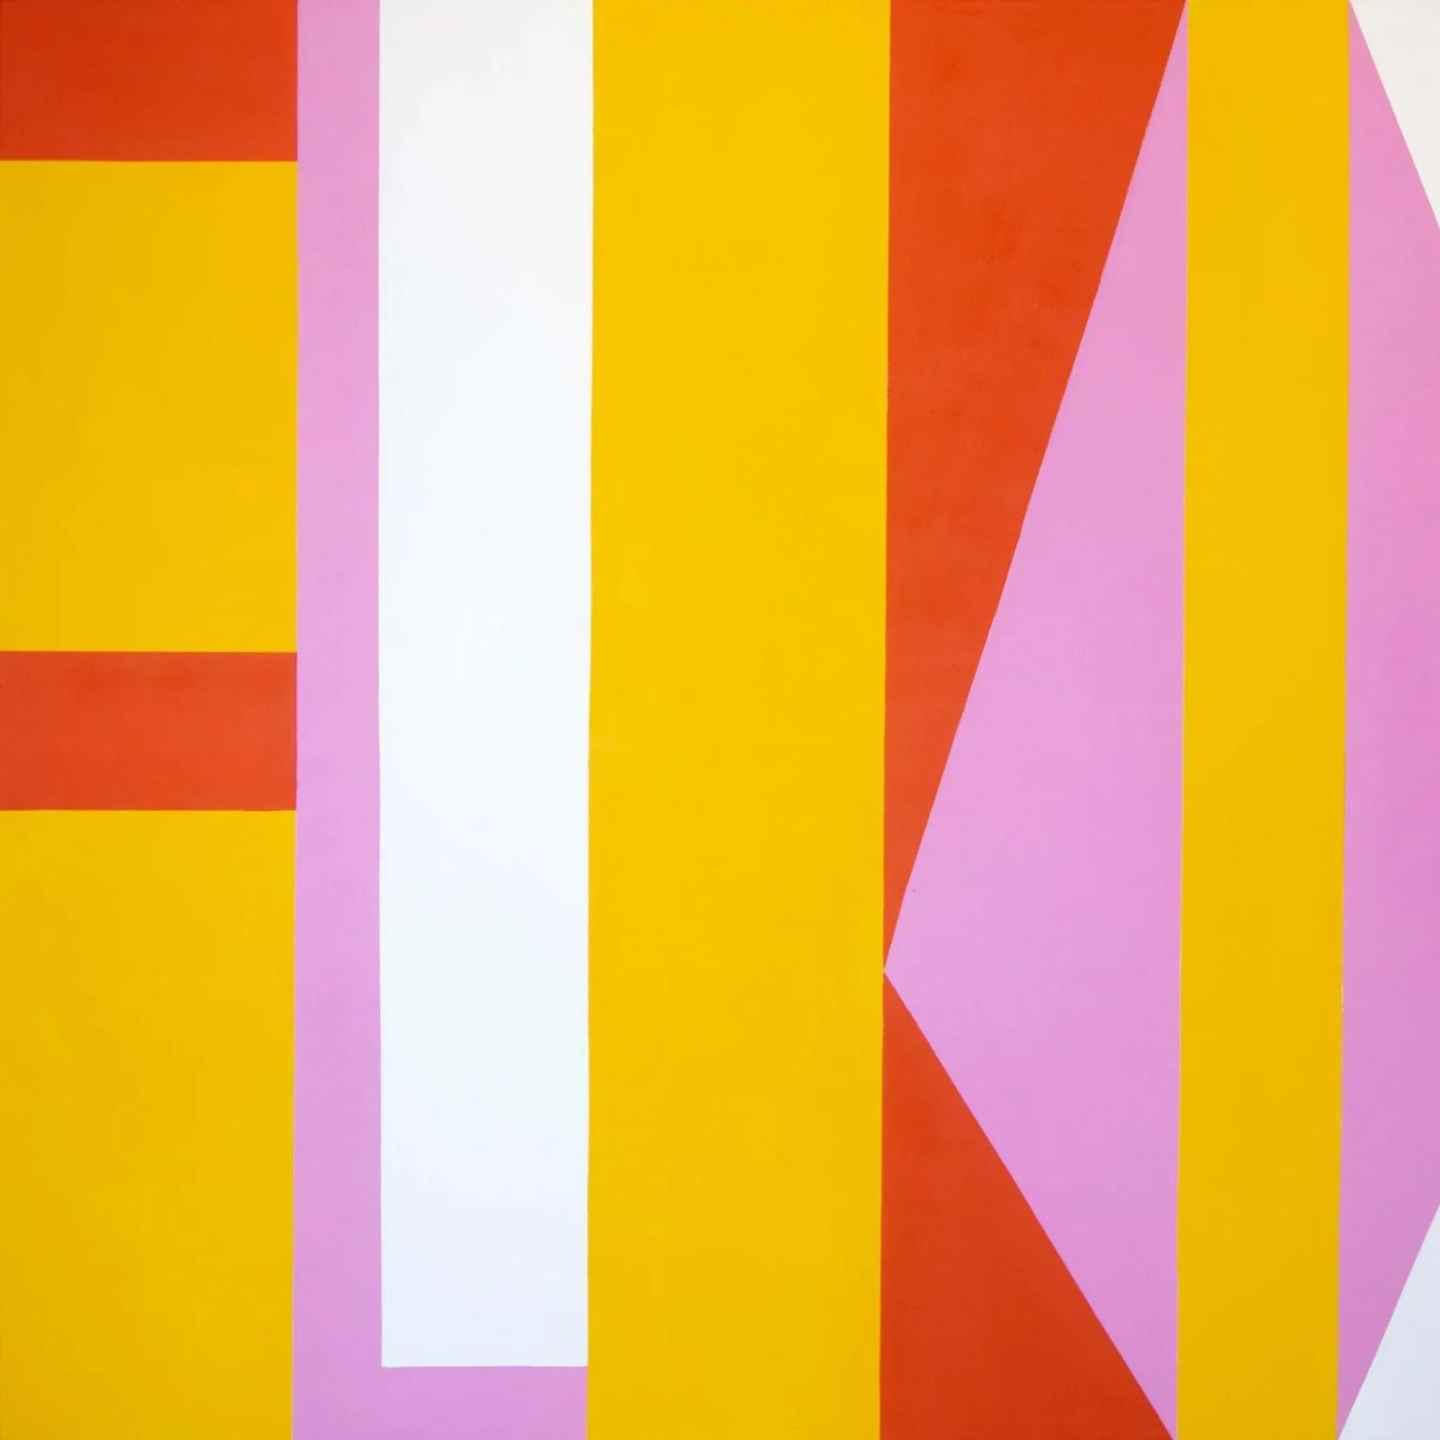 yellow, orange, white, and pink abstract shapes and lines